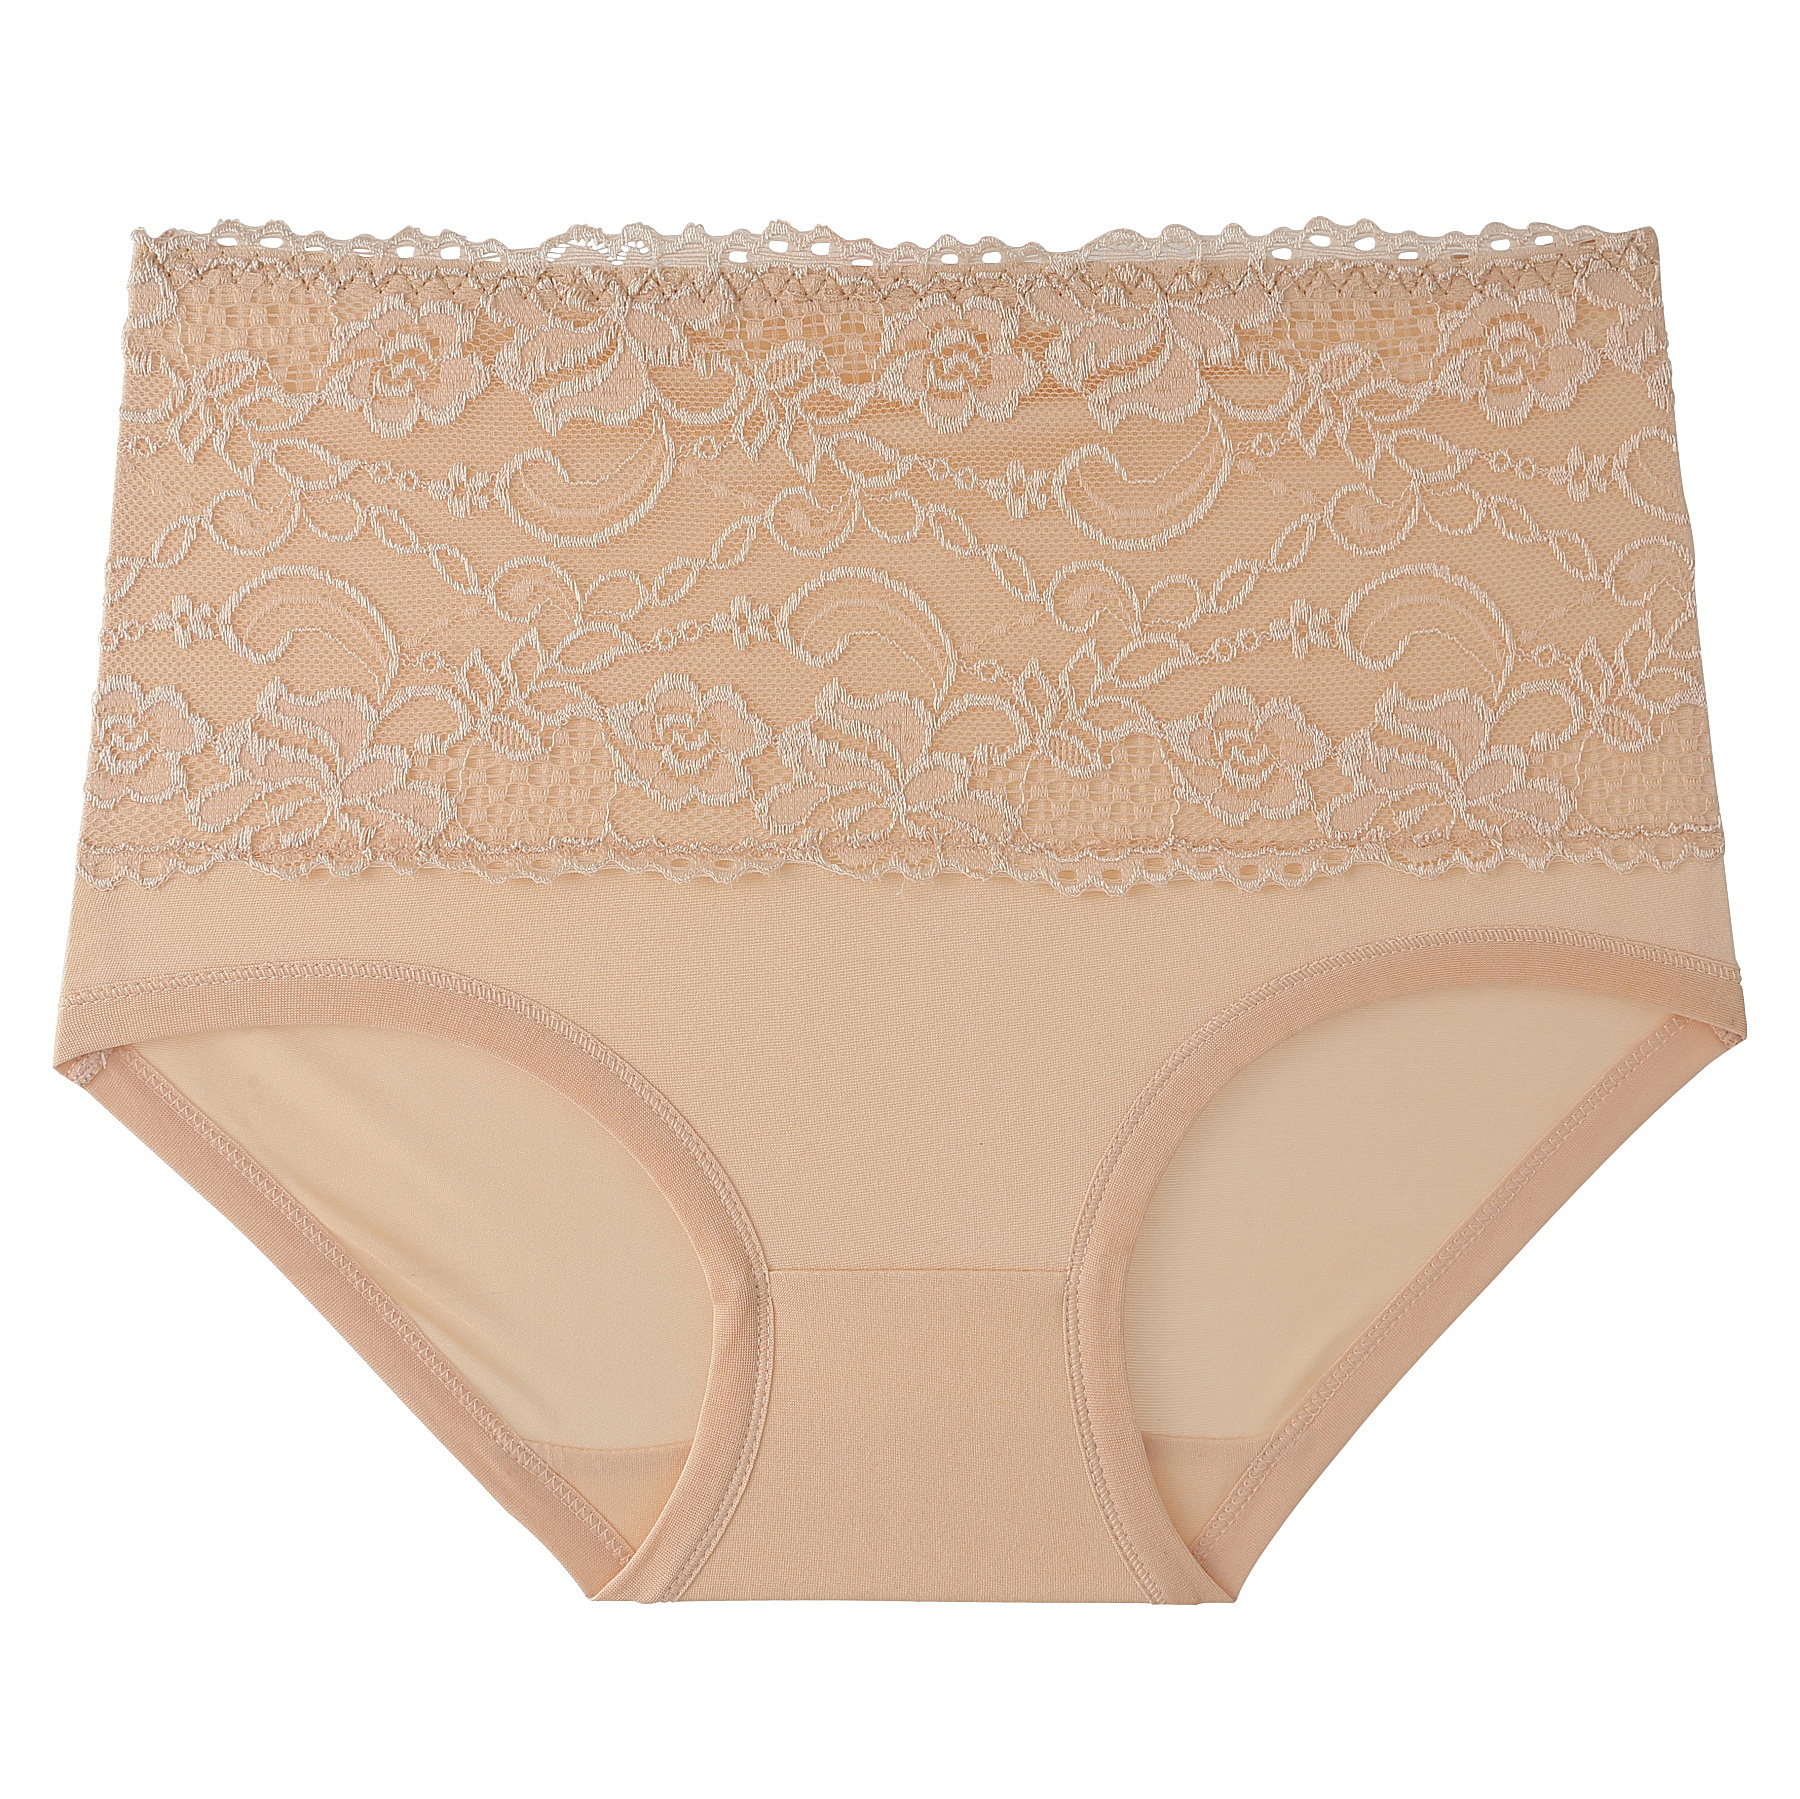 Dress Cici Beige Women's Seamless Panties 3PACK, Asia Size XL Fit Waist  27.6-32.9 Inches : Buy Online at Best Price in KSA - Souq is now :  Fashion